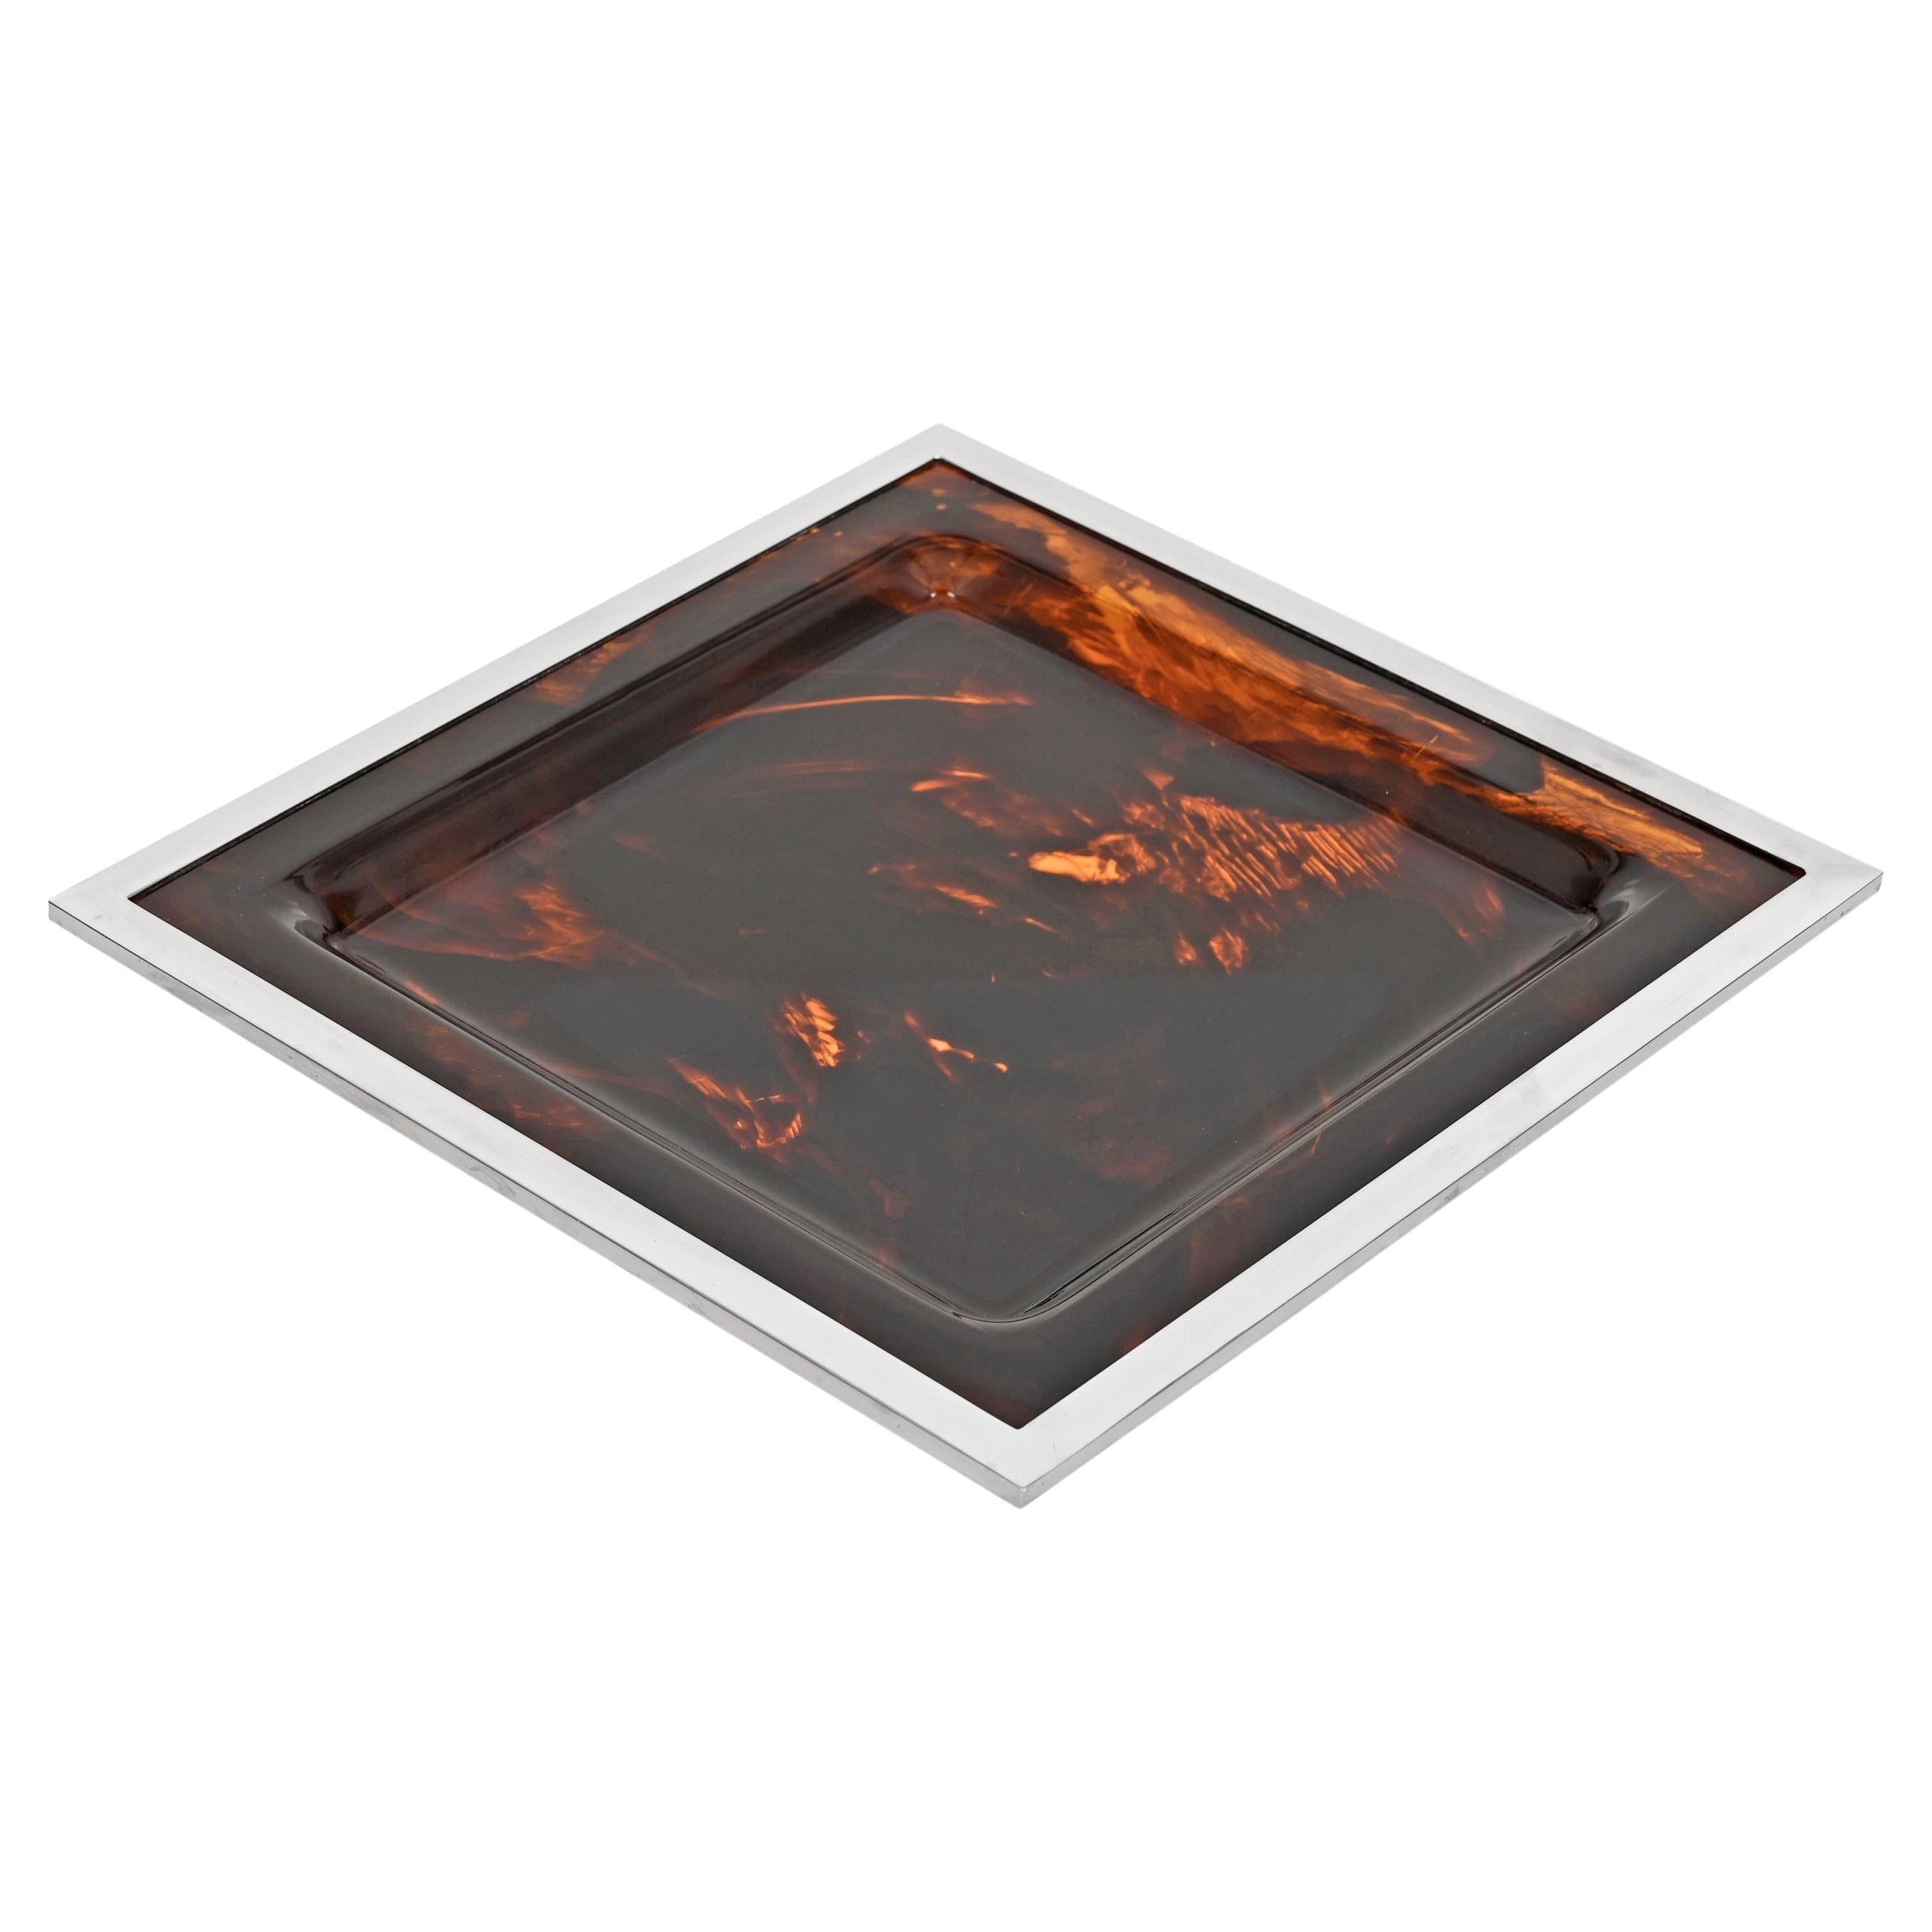 Christian Dior Midcentury Tortoiseshell and Lucite Italian Serving Tray, 1970s